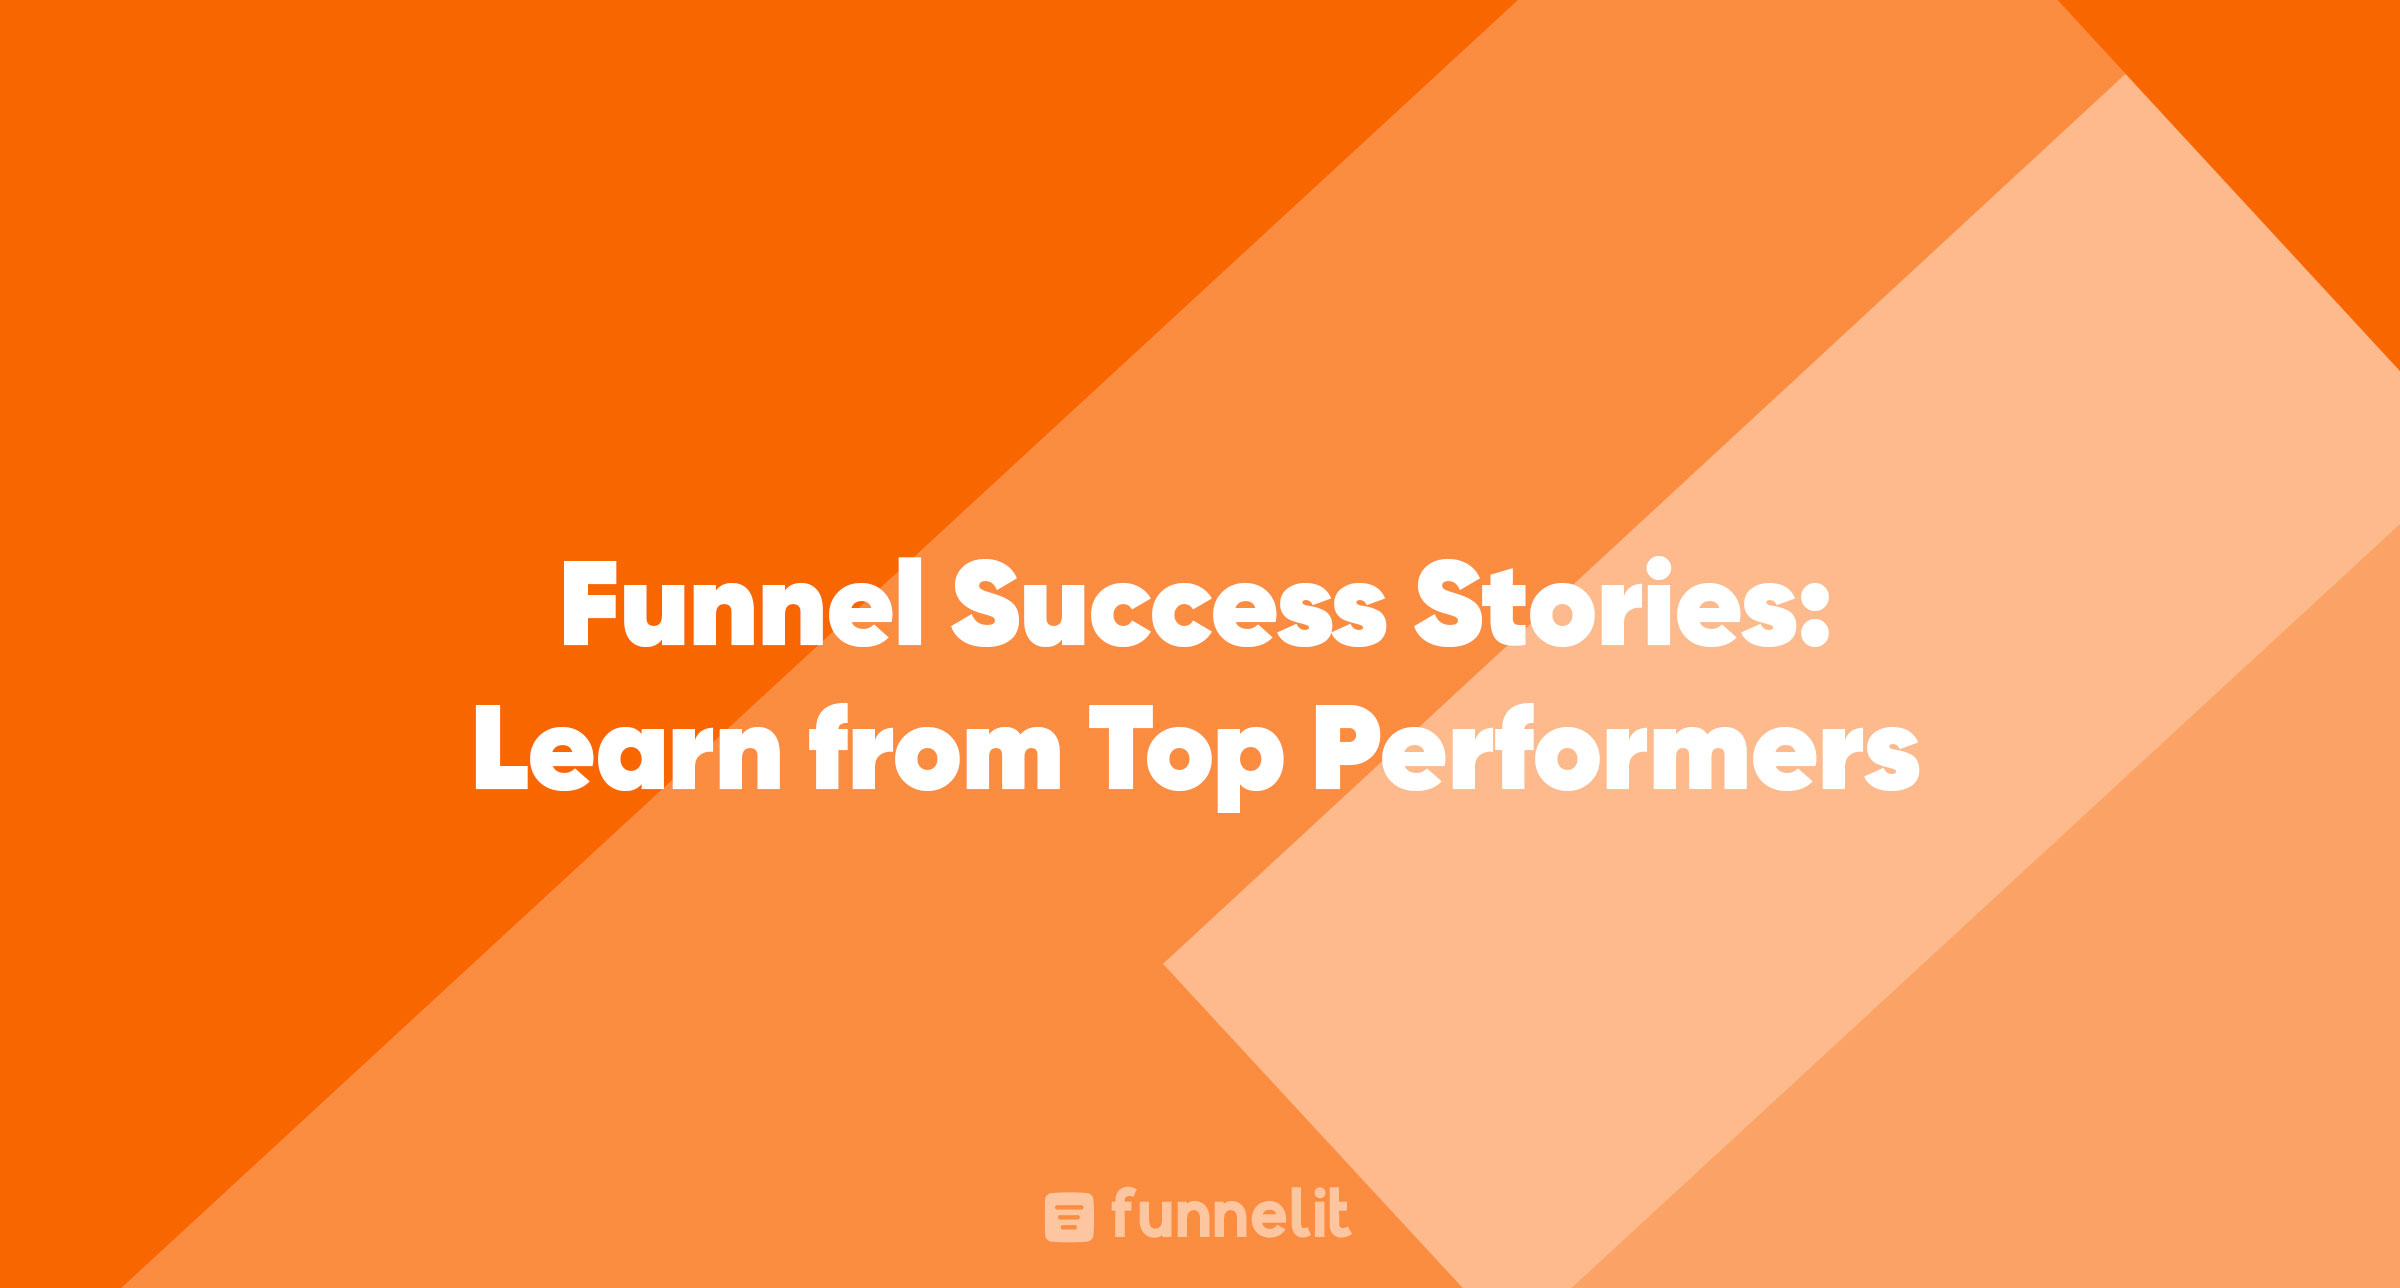 Article | Funnel Success Stories: Learn from Top Performers